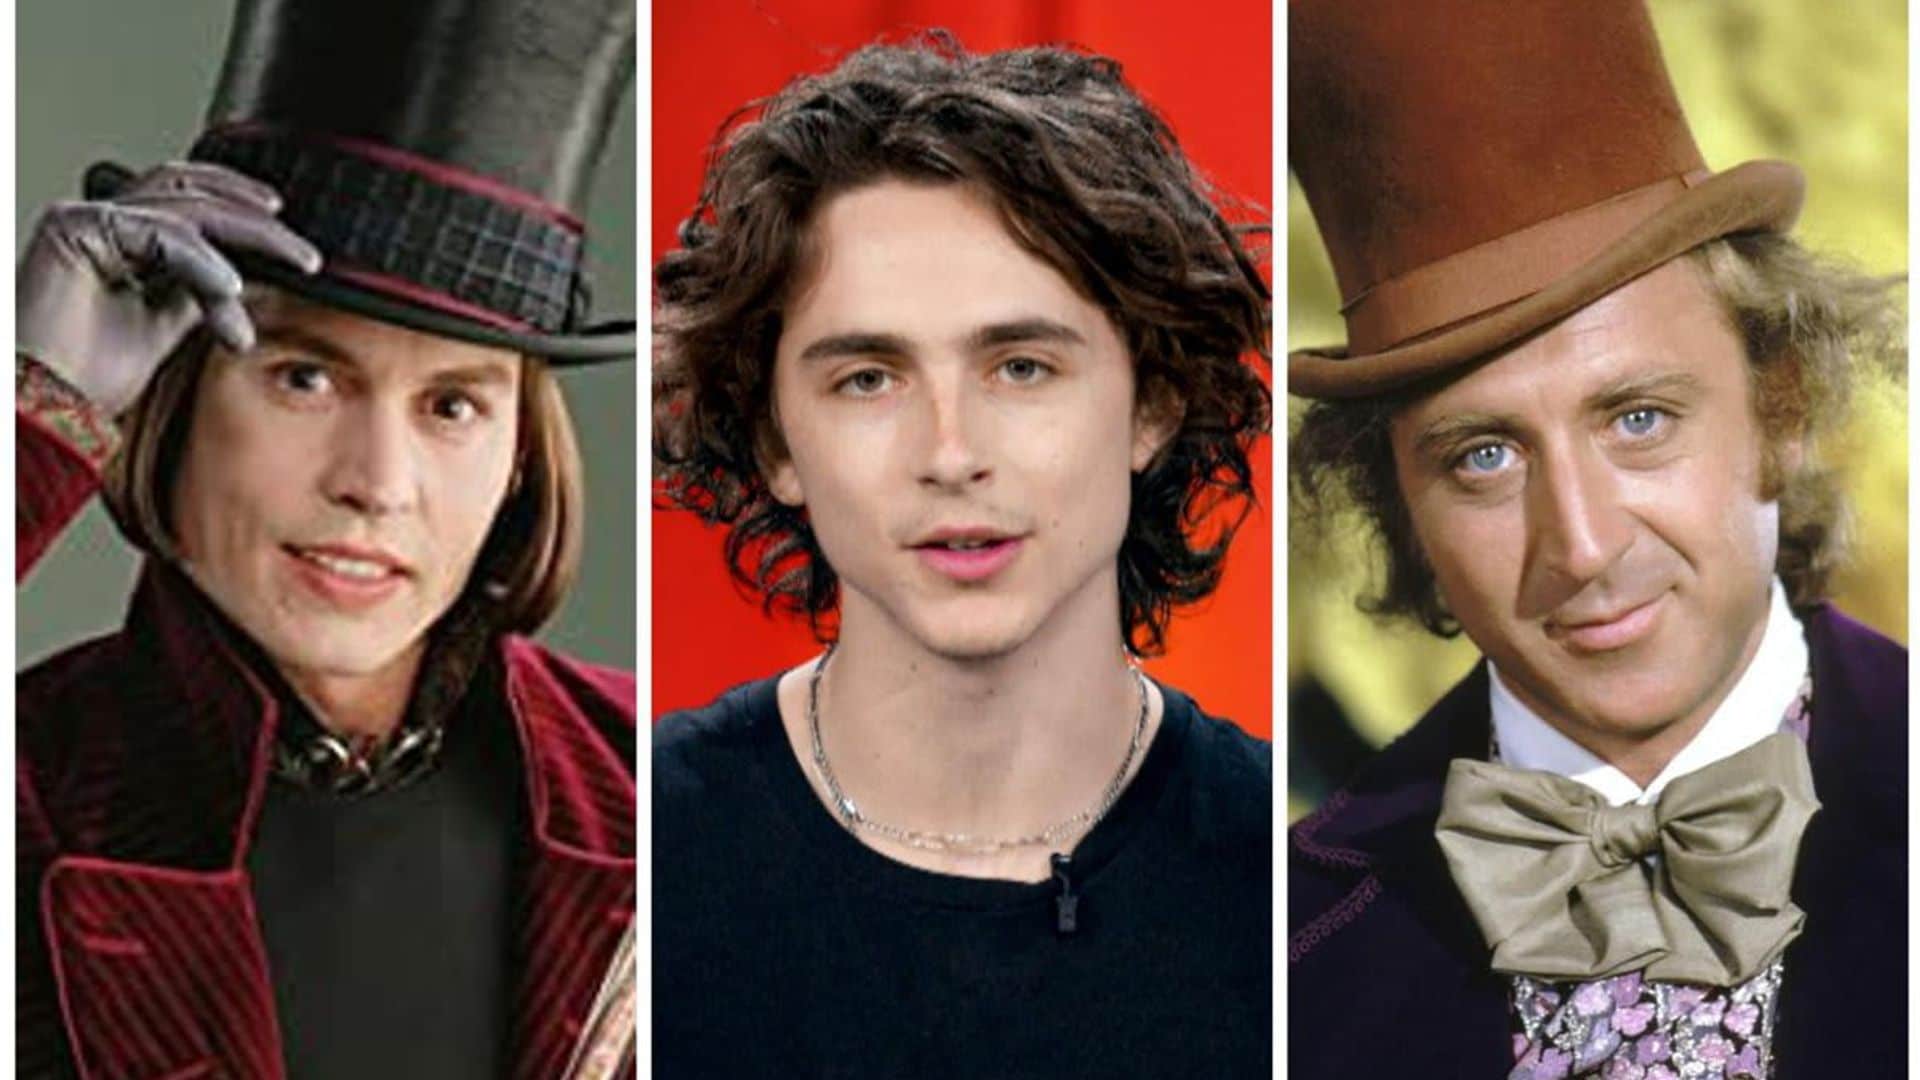 Timothée Chalamet becomes the new Willy Wonka in upcoming movie